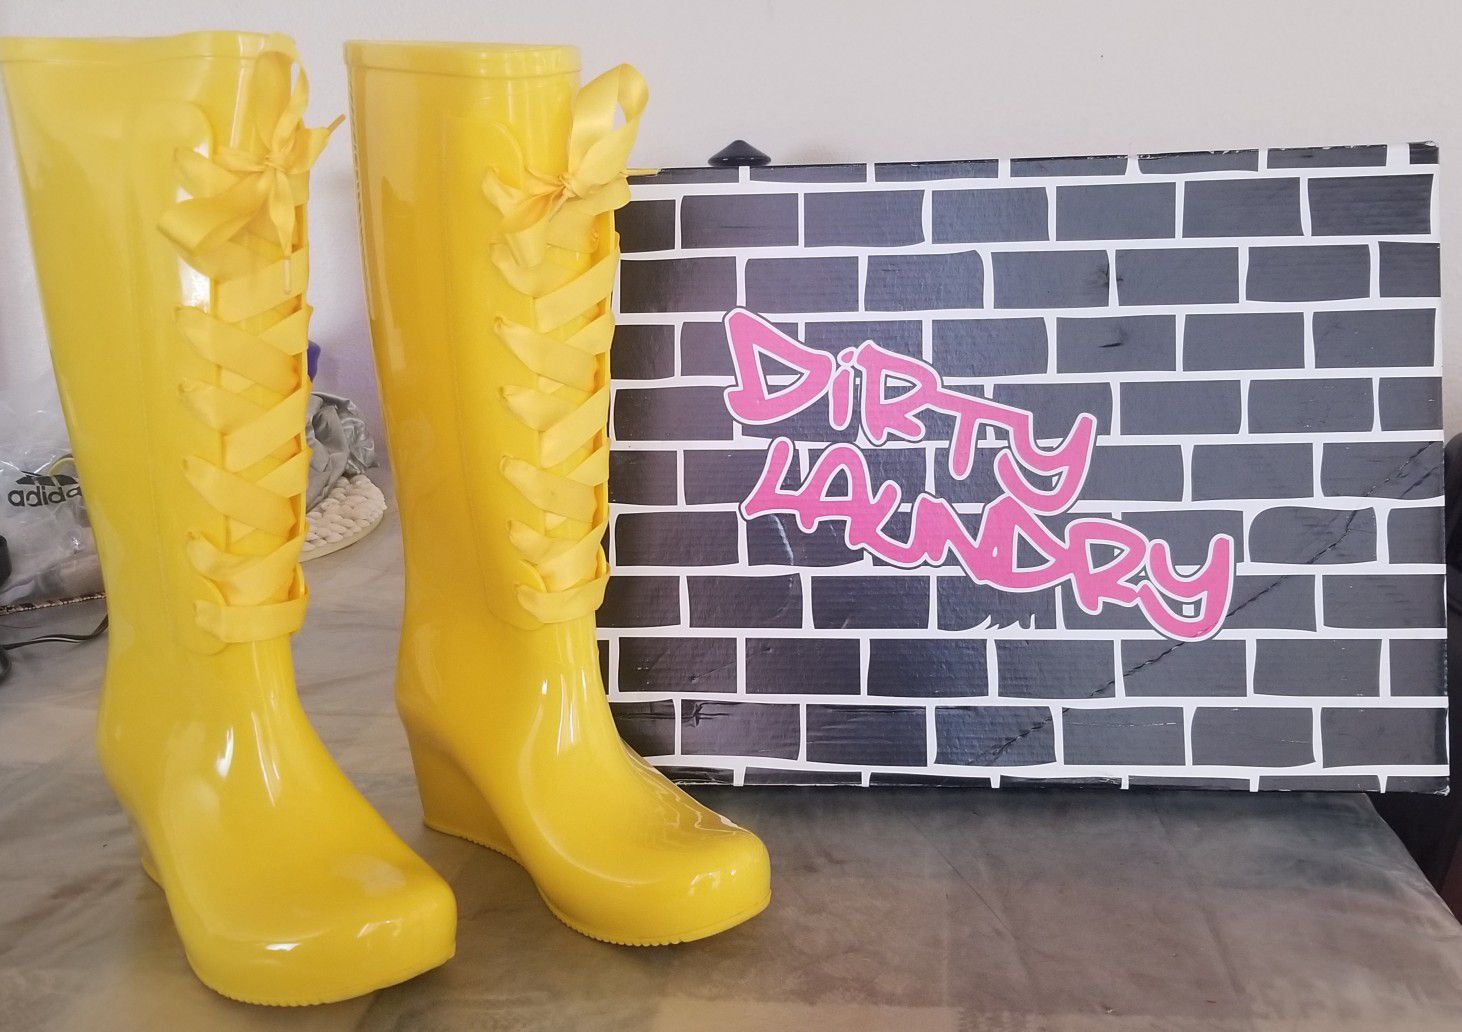 Rain boots with wedge. Dirty Laundry brand